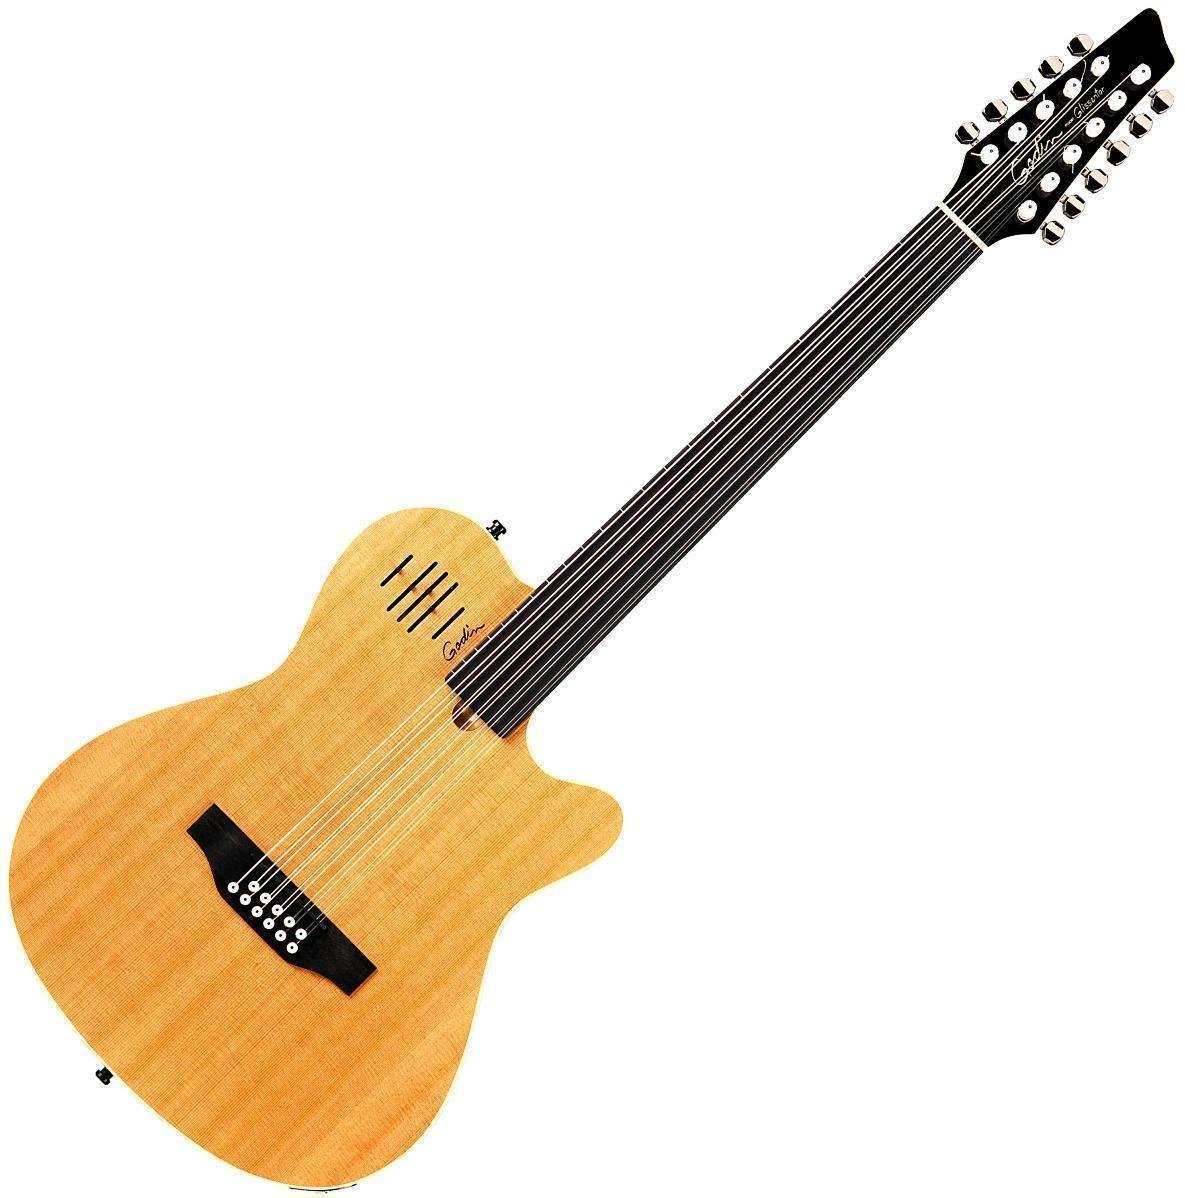 12-string Acoustic-electric Guitar Godin A 11 Glissentar Natural